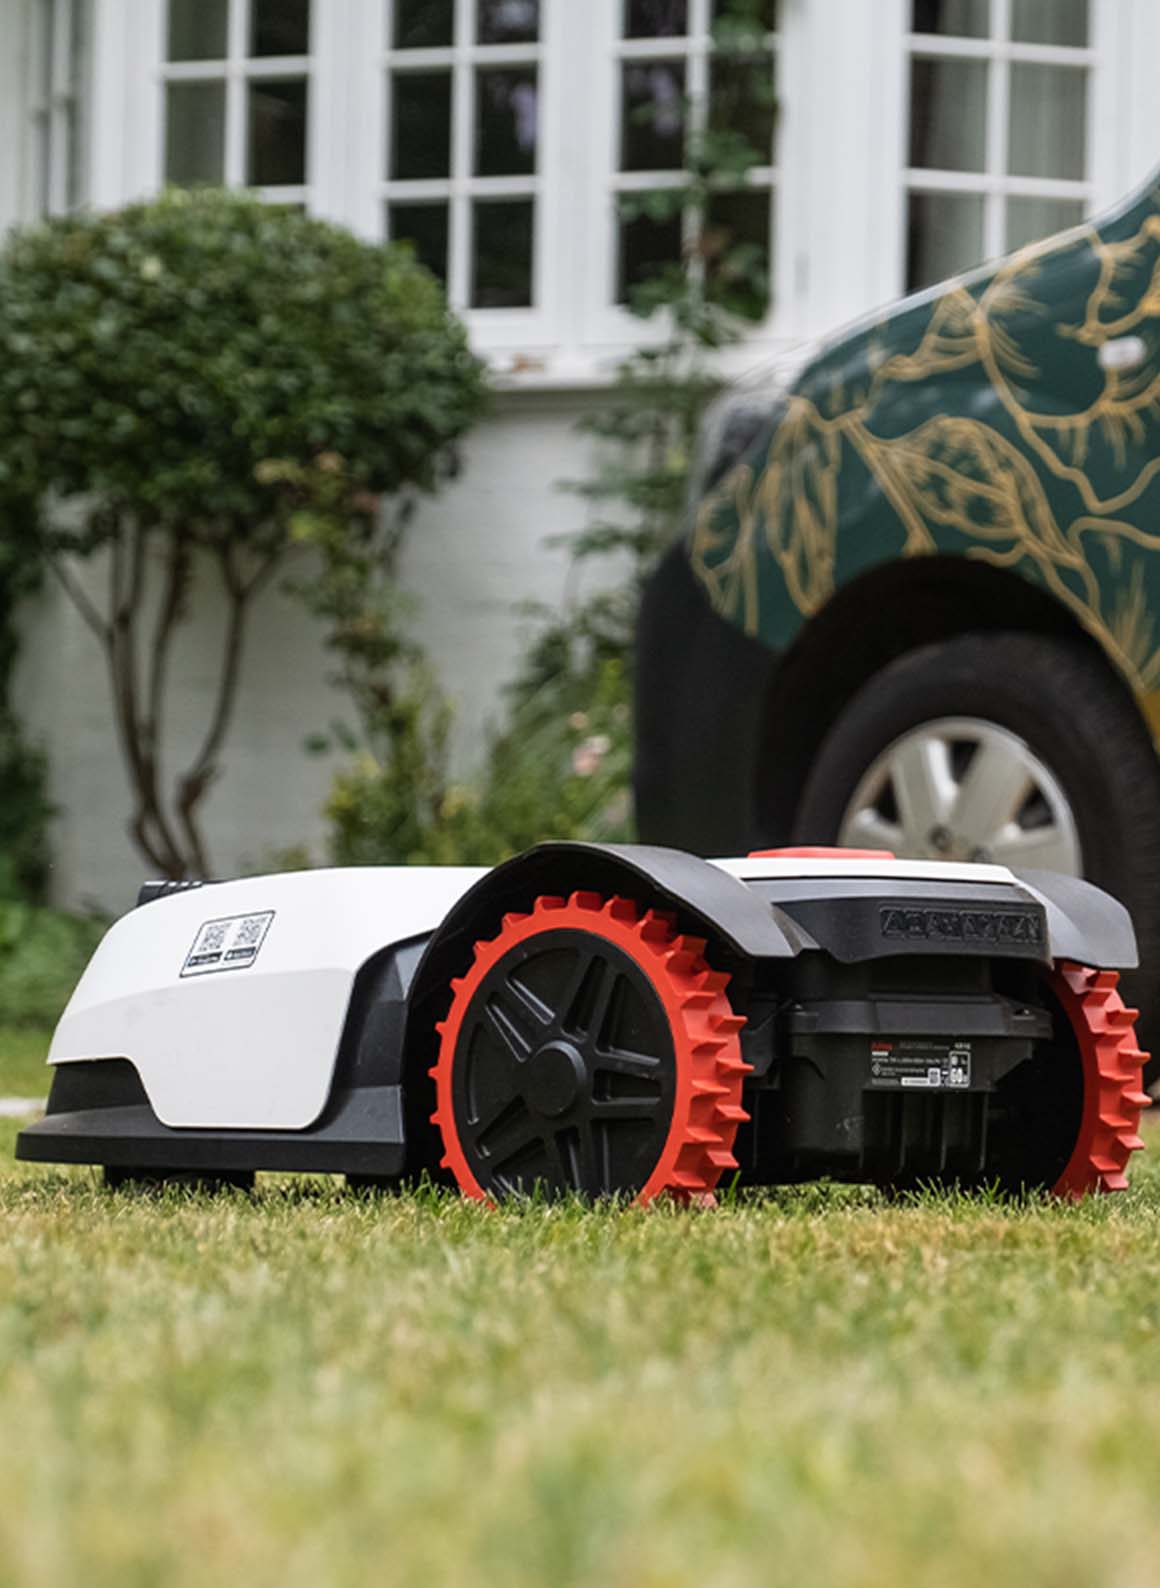 An automated lawn mower